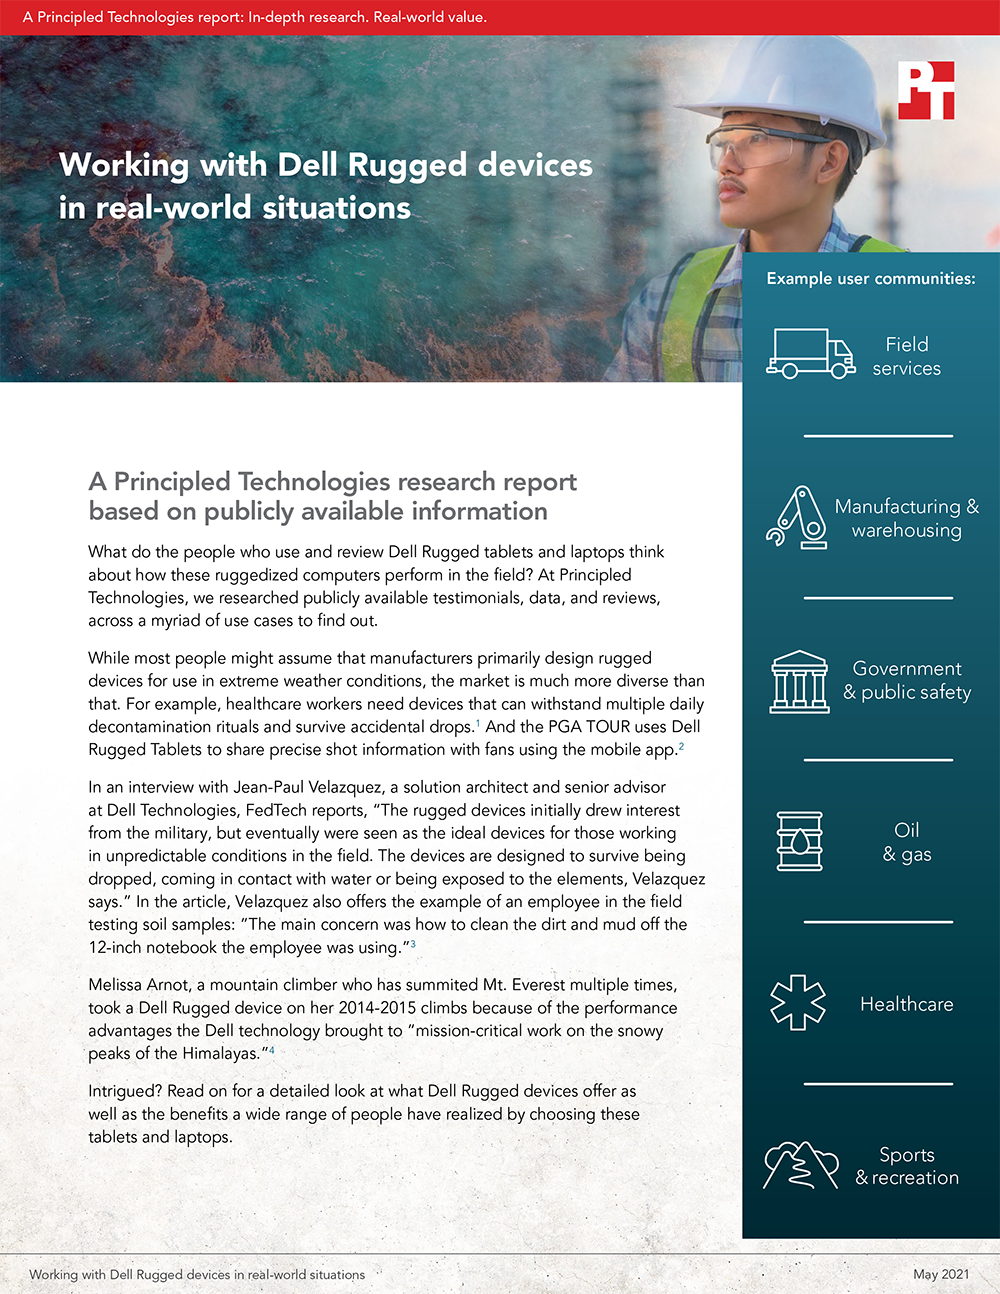 Principled Technologies Releases a Research Report About Dell Rugged Devices in Real-World Situations